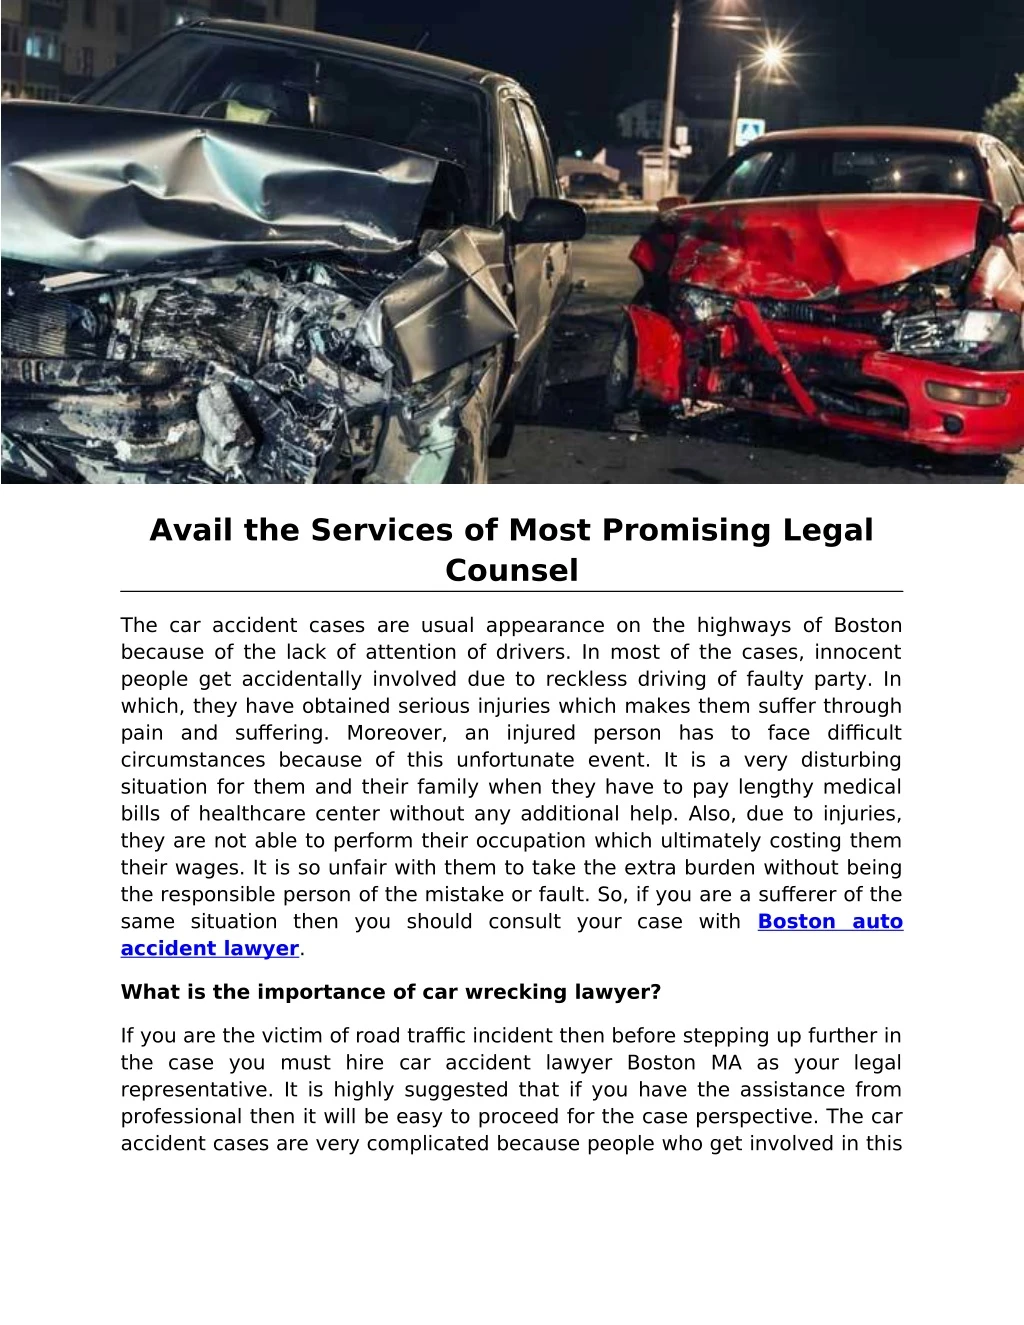 avail the services of most promising legal counsel